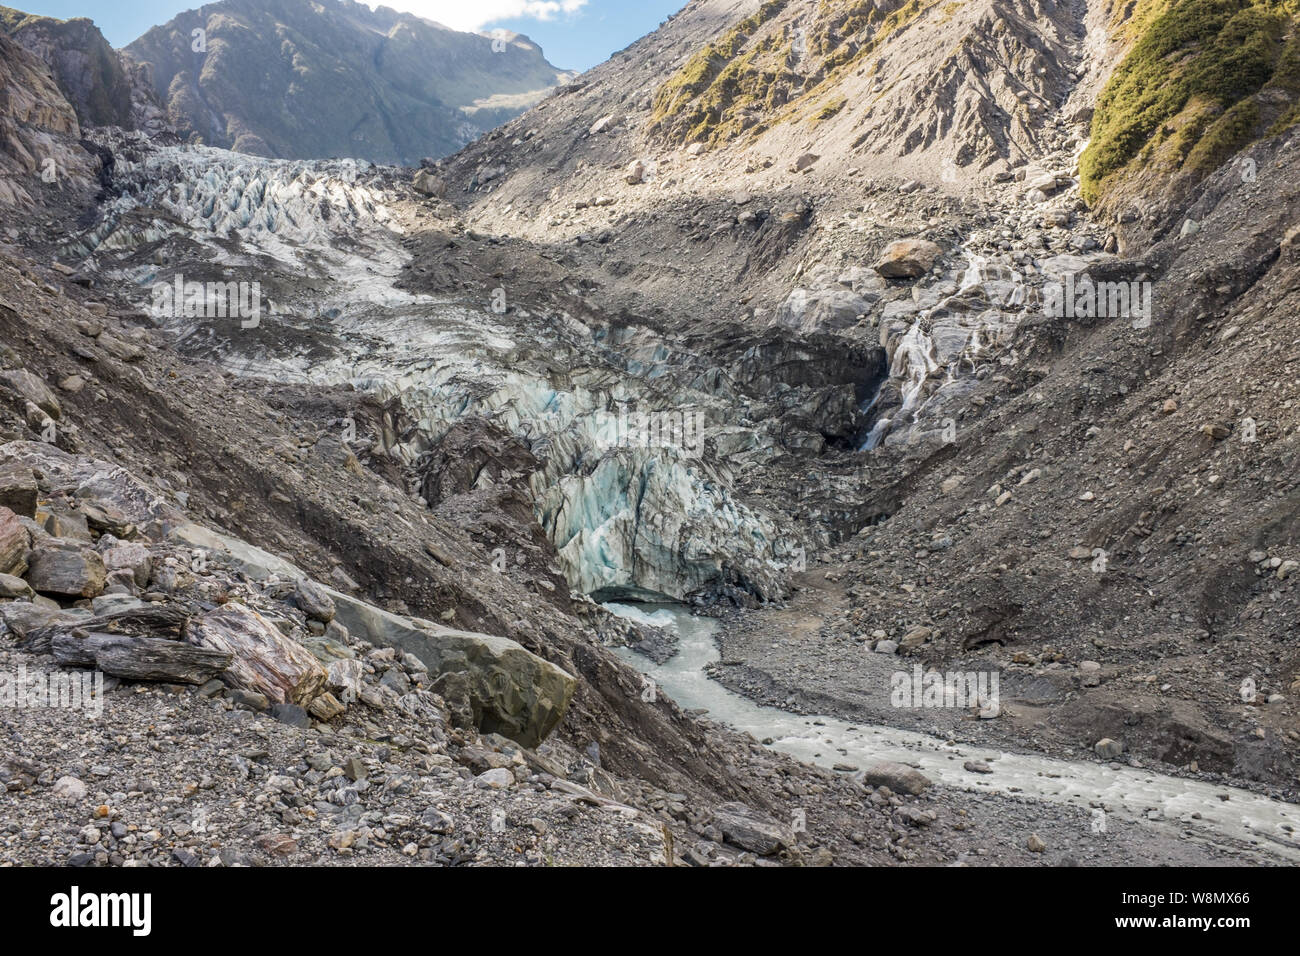 Hiking through the barren and rugged landscape that leads to the head of Franz Josef Glacier in New Zealand nobody in the image Stock Photo